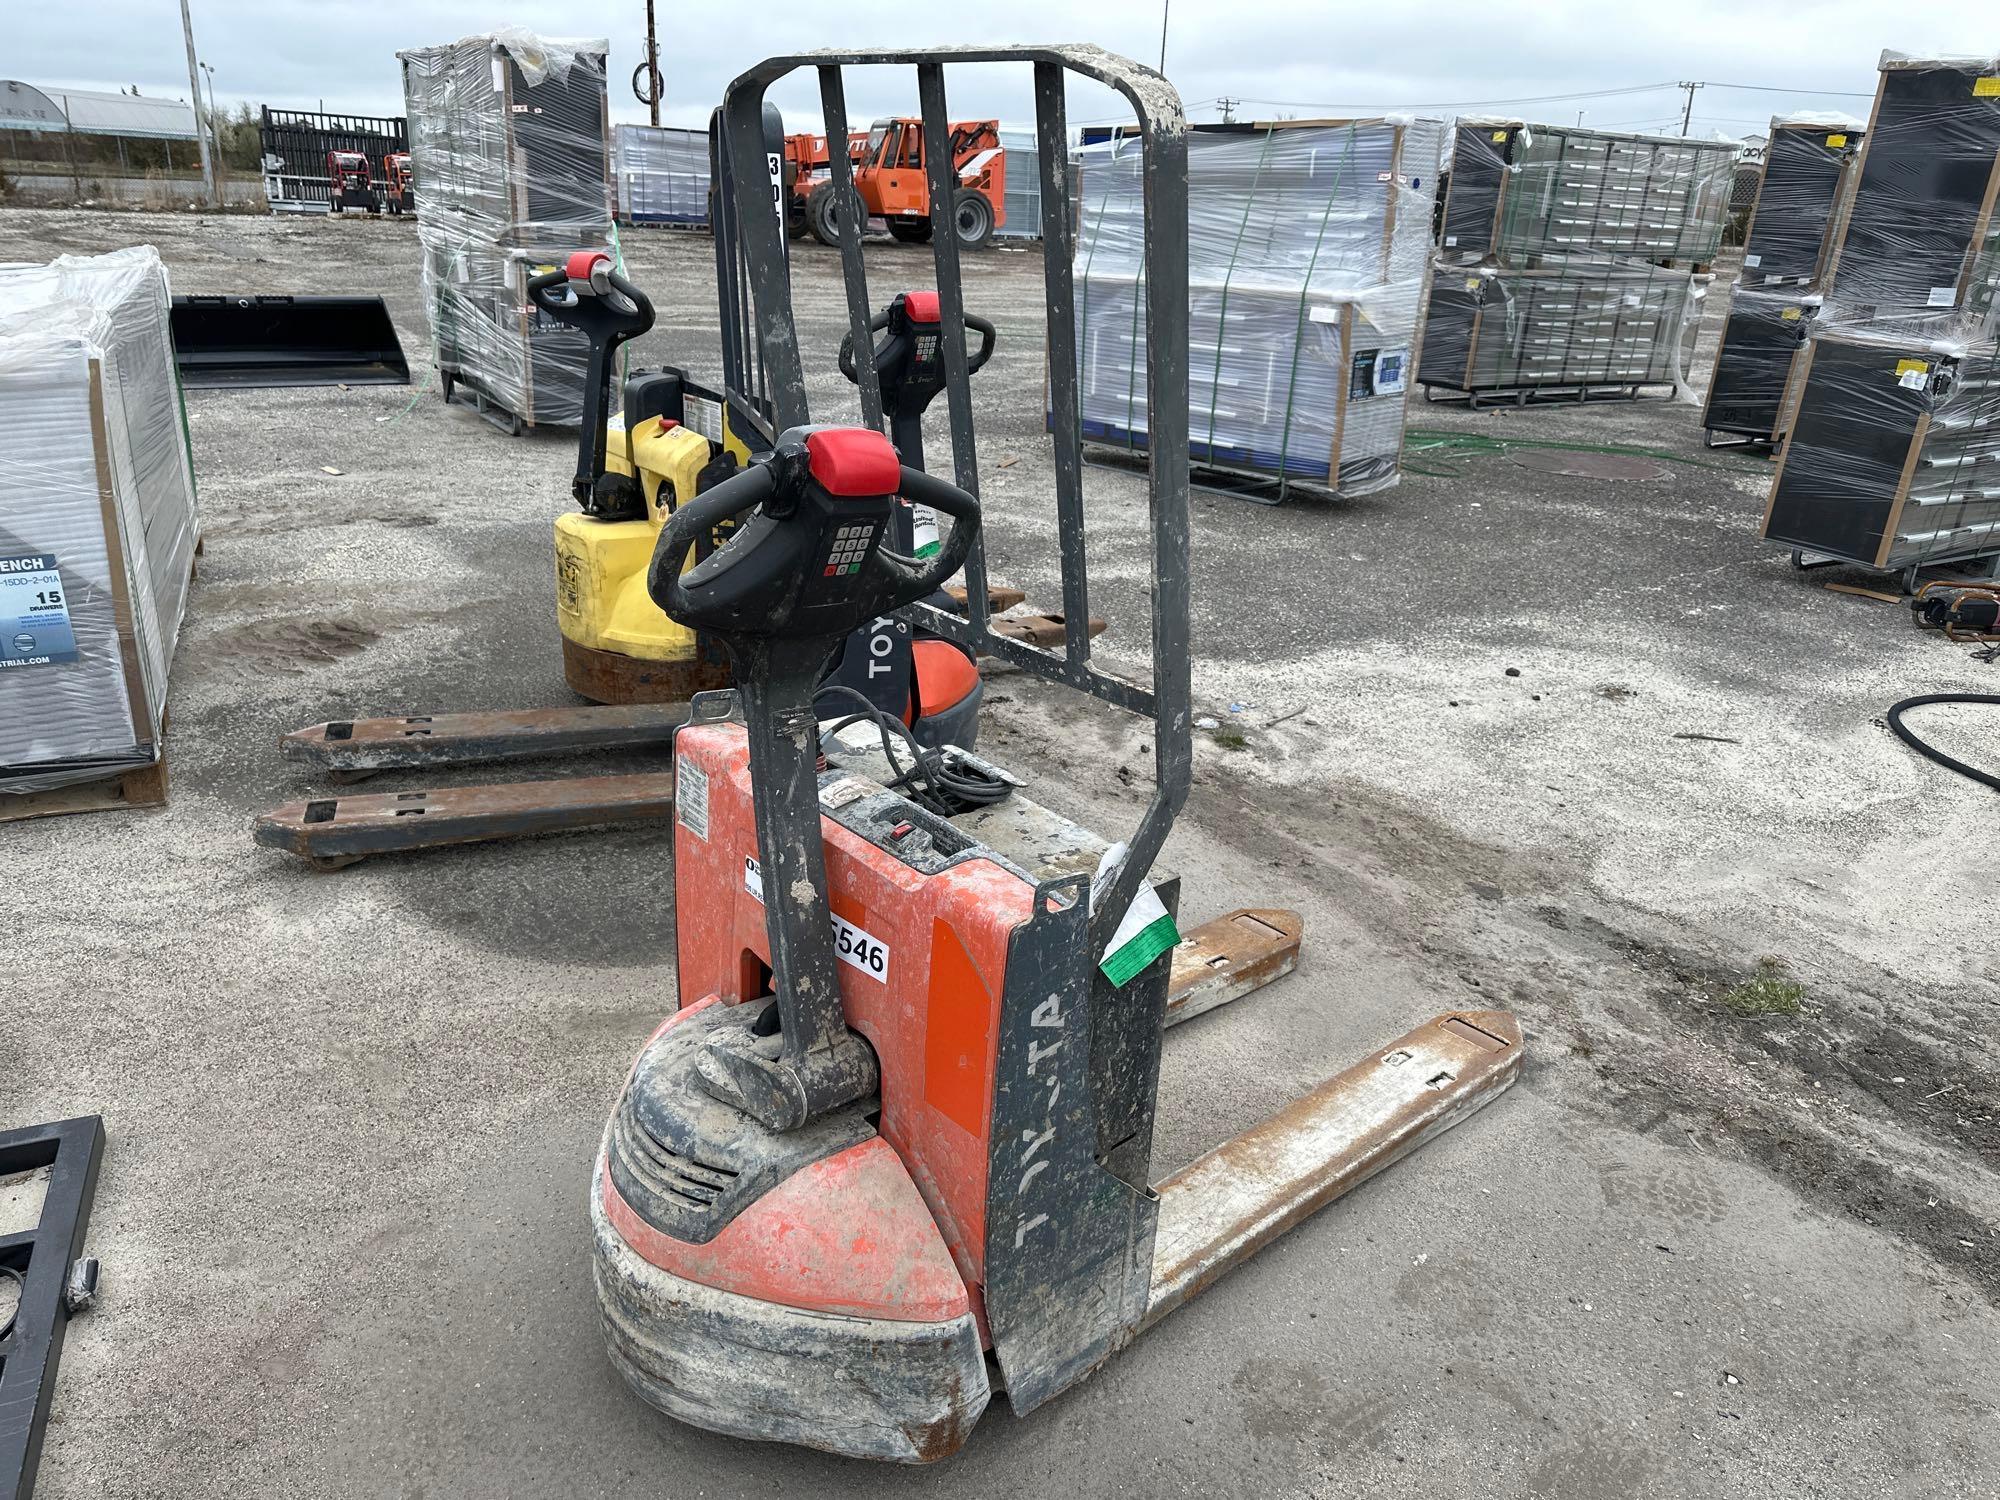 2019 TOYOTA 8HBW23 PALLET JACK SUPPORT EQUIPMENT SN:38506 electric powered.